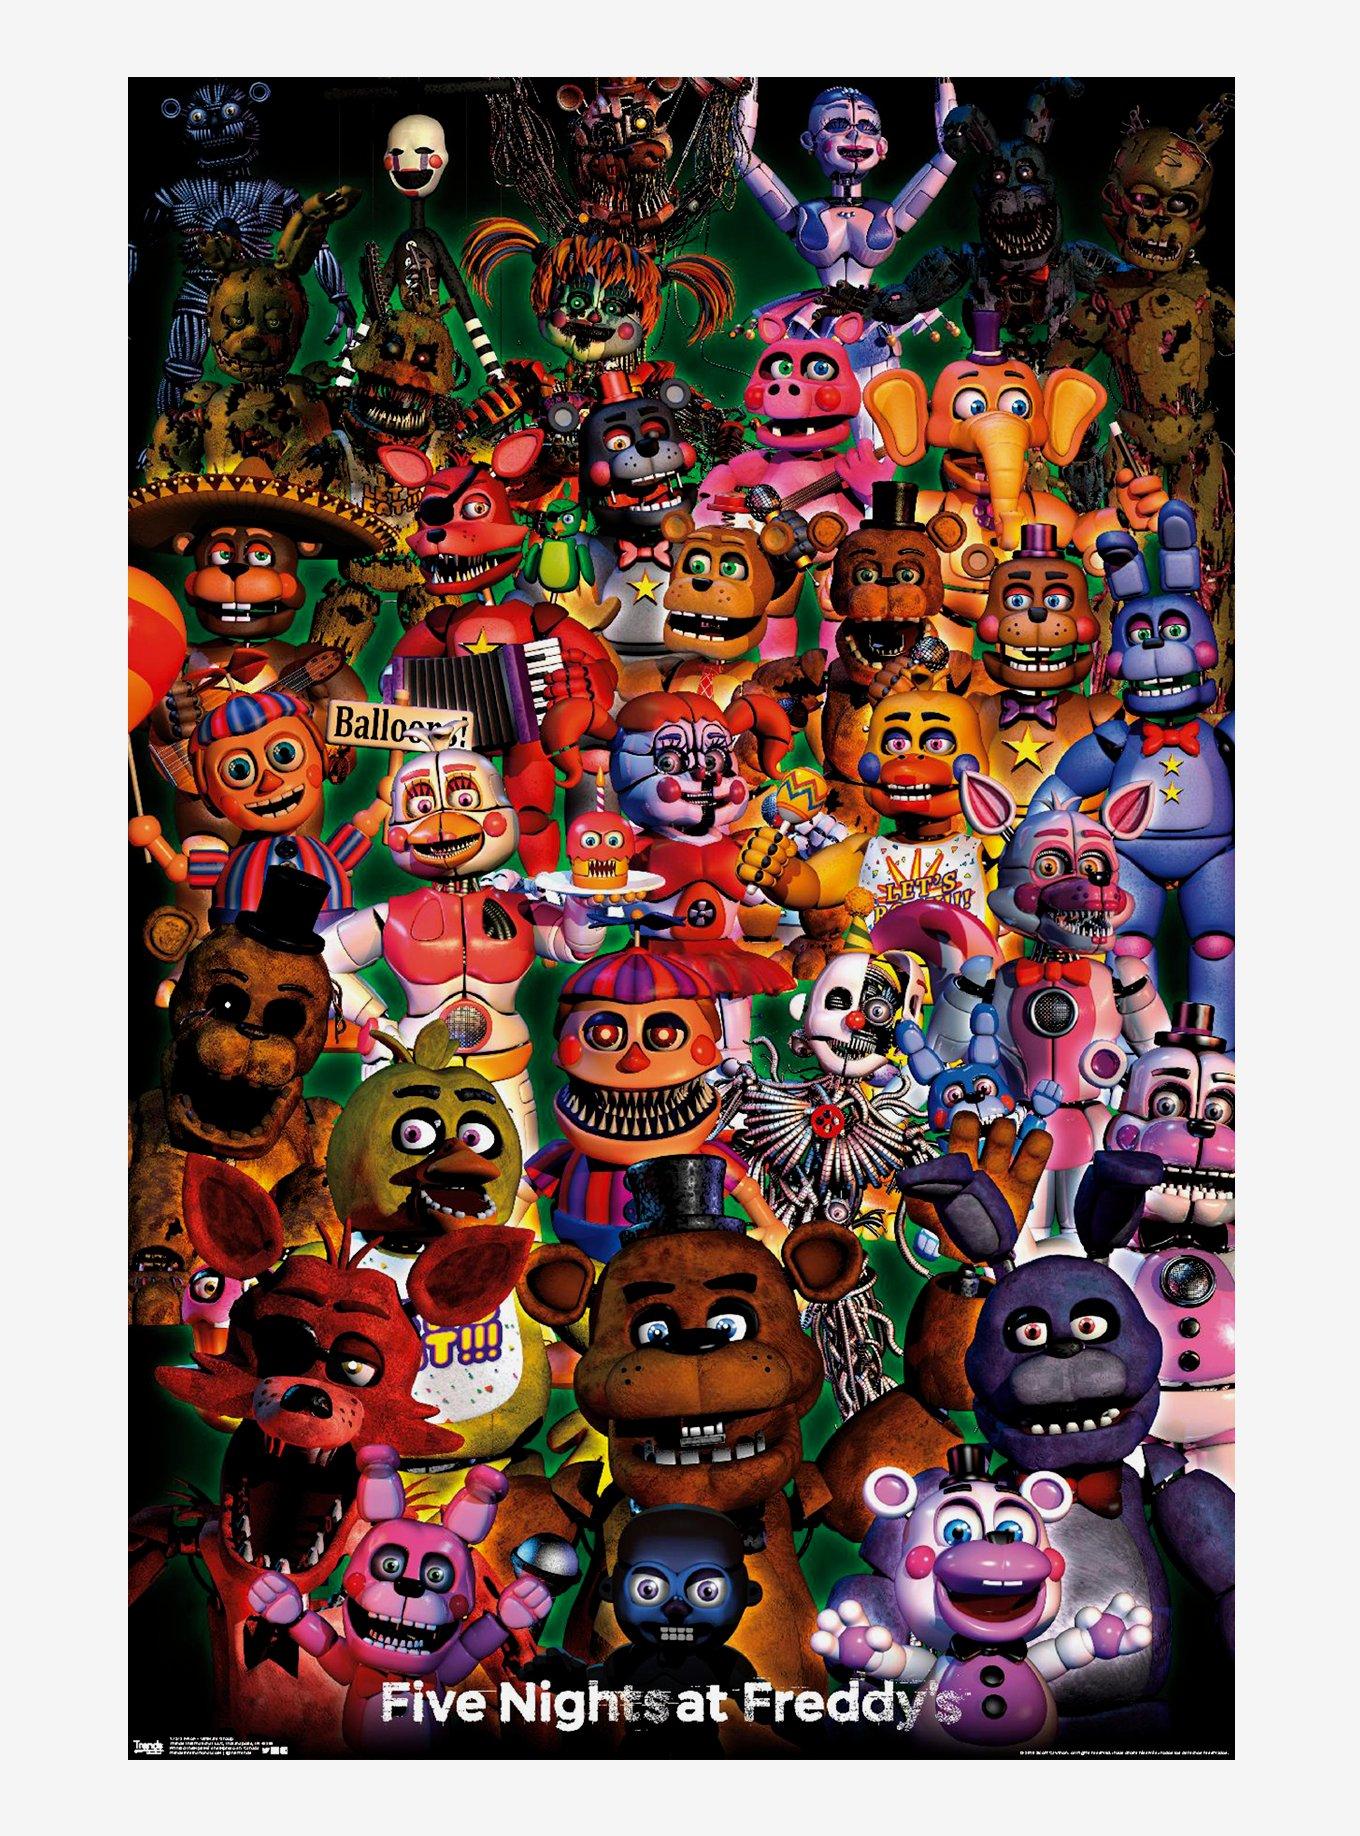 pictures of five nights at freddys characters